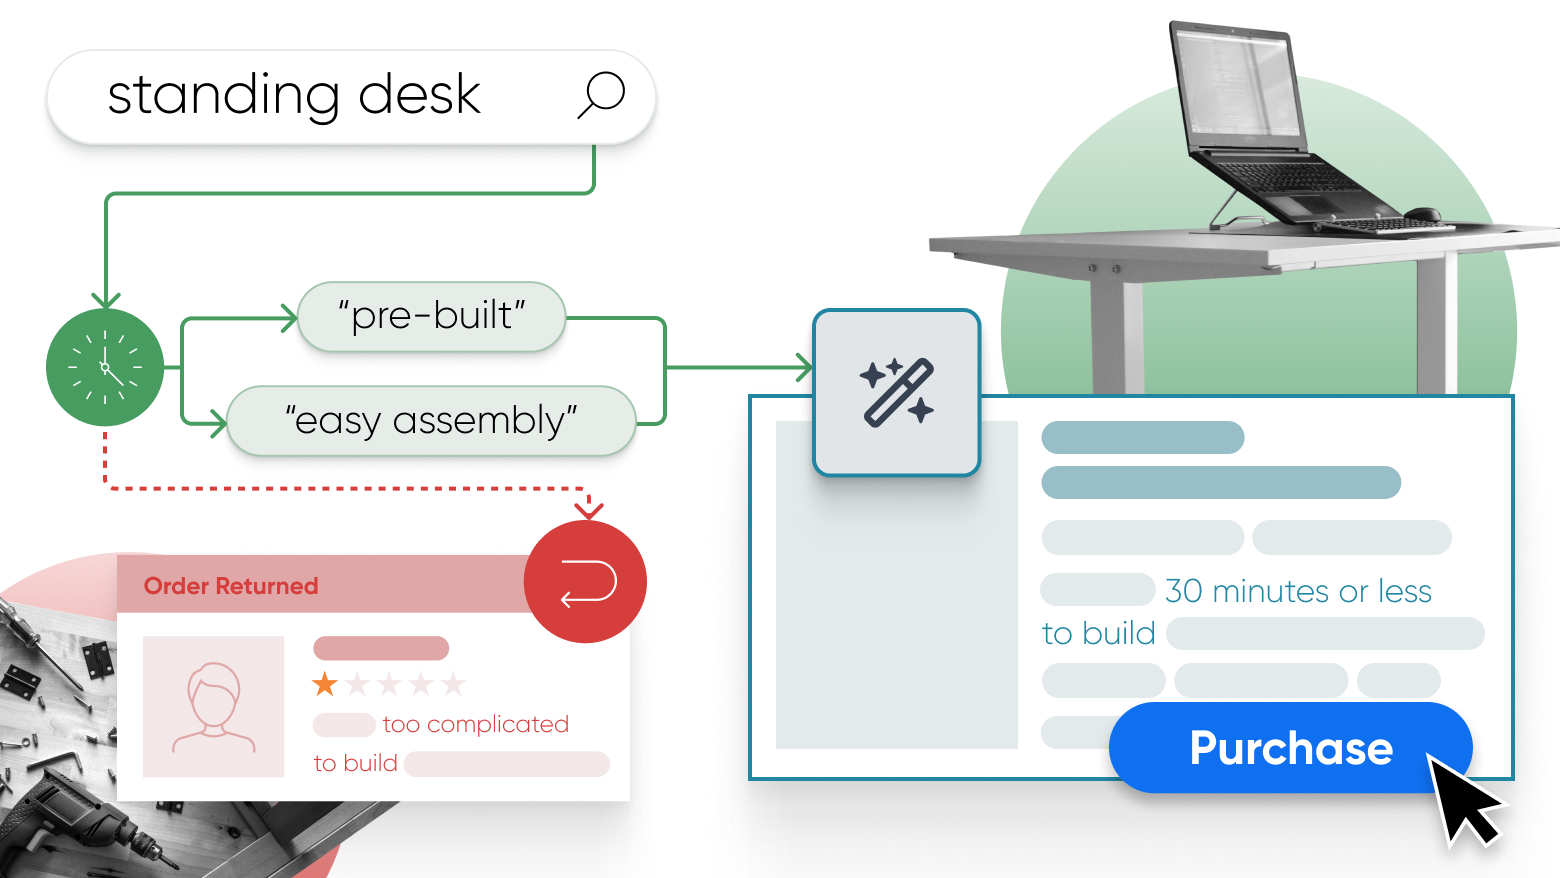 A user journey map that shows the process of deciding to buy a standing desk. The user's previous purchase history shows that they like things that are pre-built, or easy assembly (they returned something in the past because it took 3 hours and reviewed it as too complicated to build!). AI can generate a suggestion for a product that takes 30 minutes or less to build, basing it's recommendation on all this shopper history.